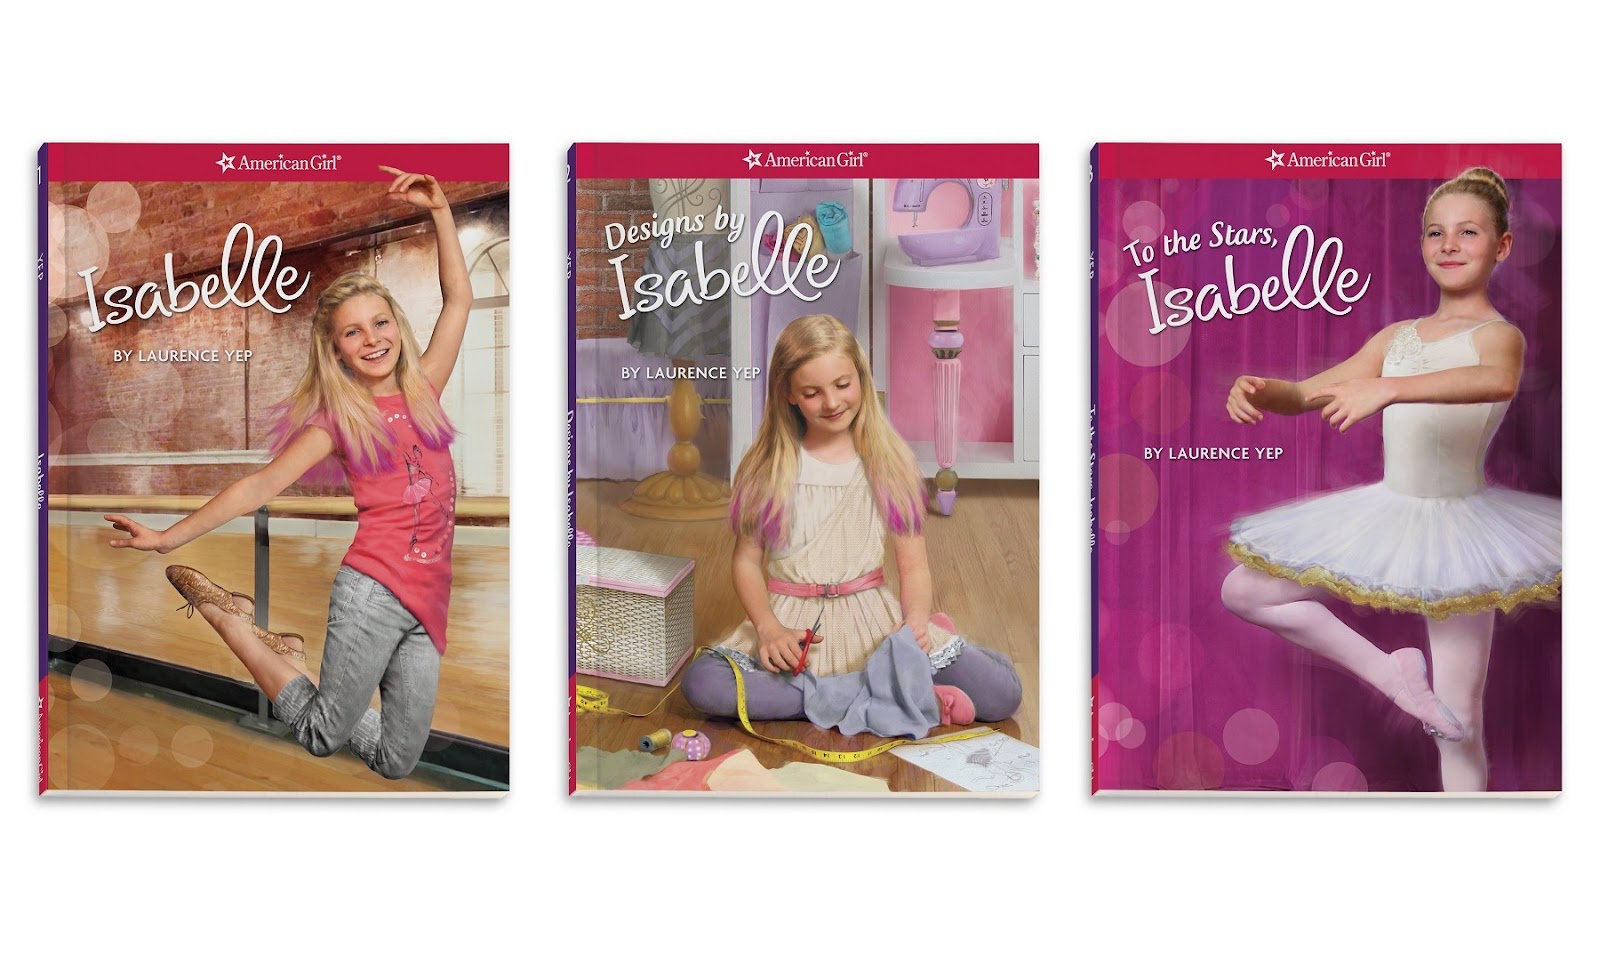 Bonggamom Finds: American Girl introduces Isabelle Palmer